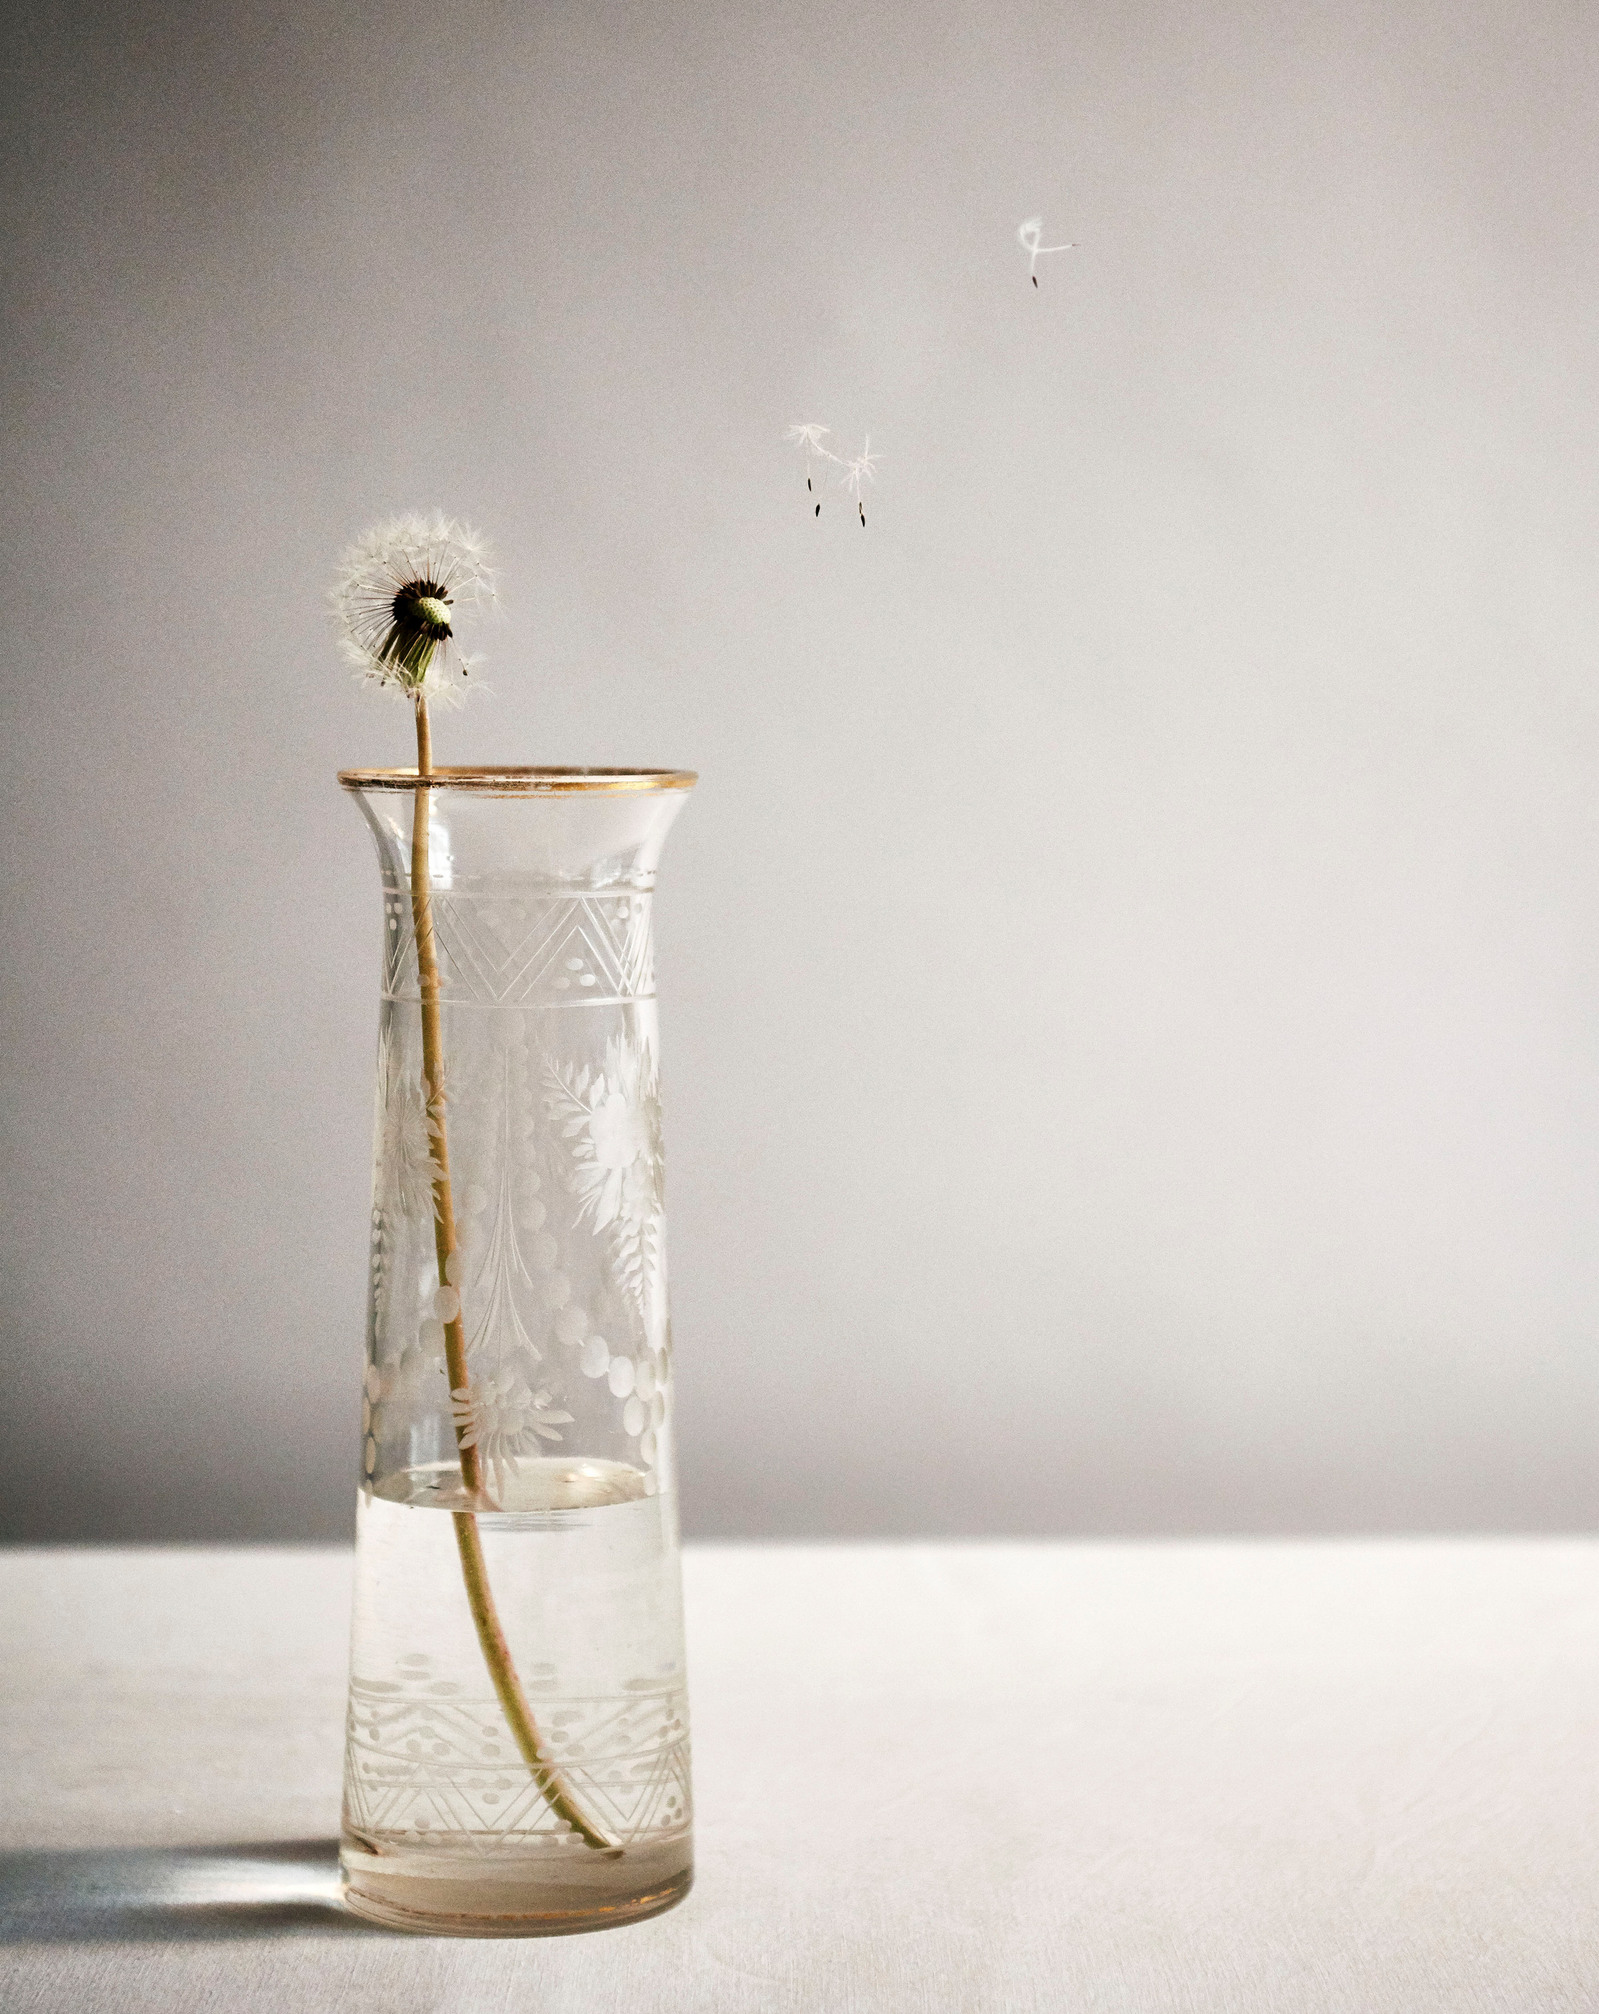 Still Life photography of dandelion blow puff in vase